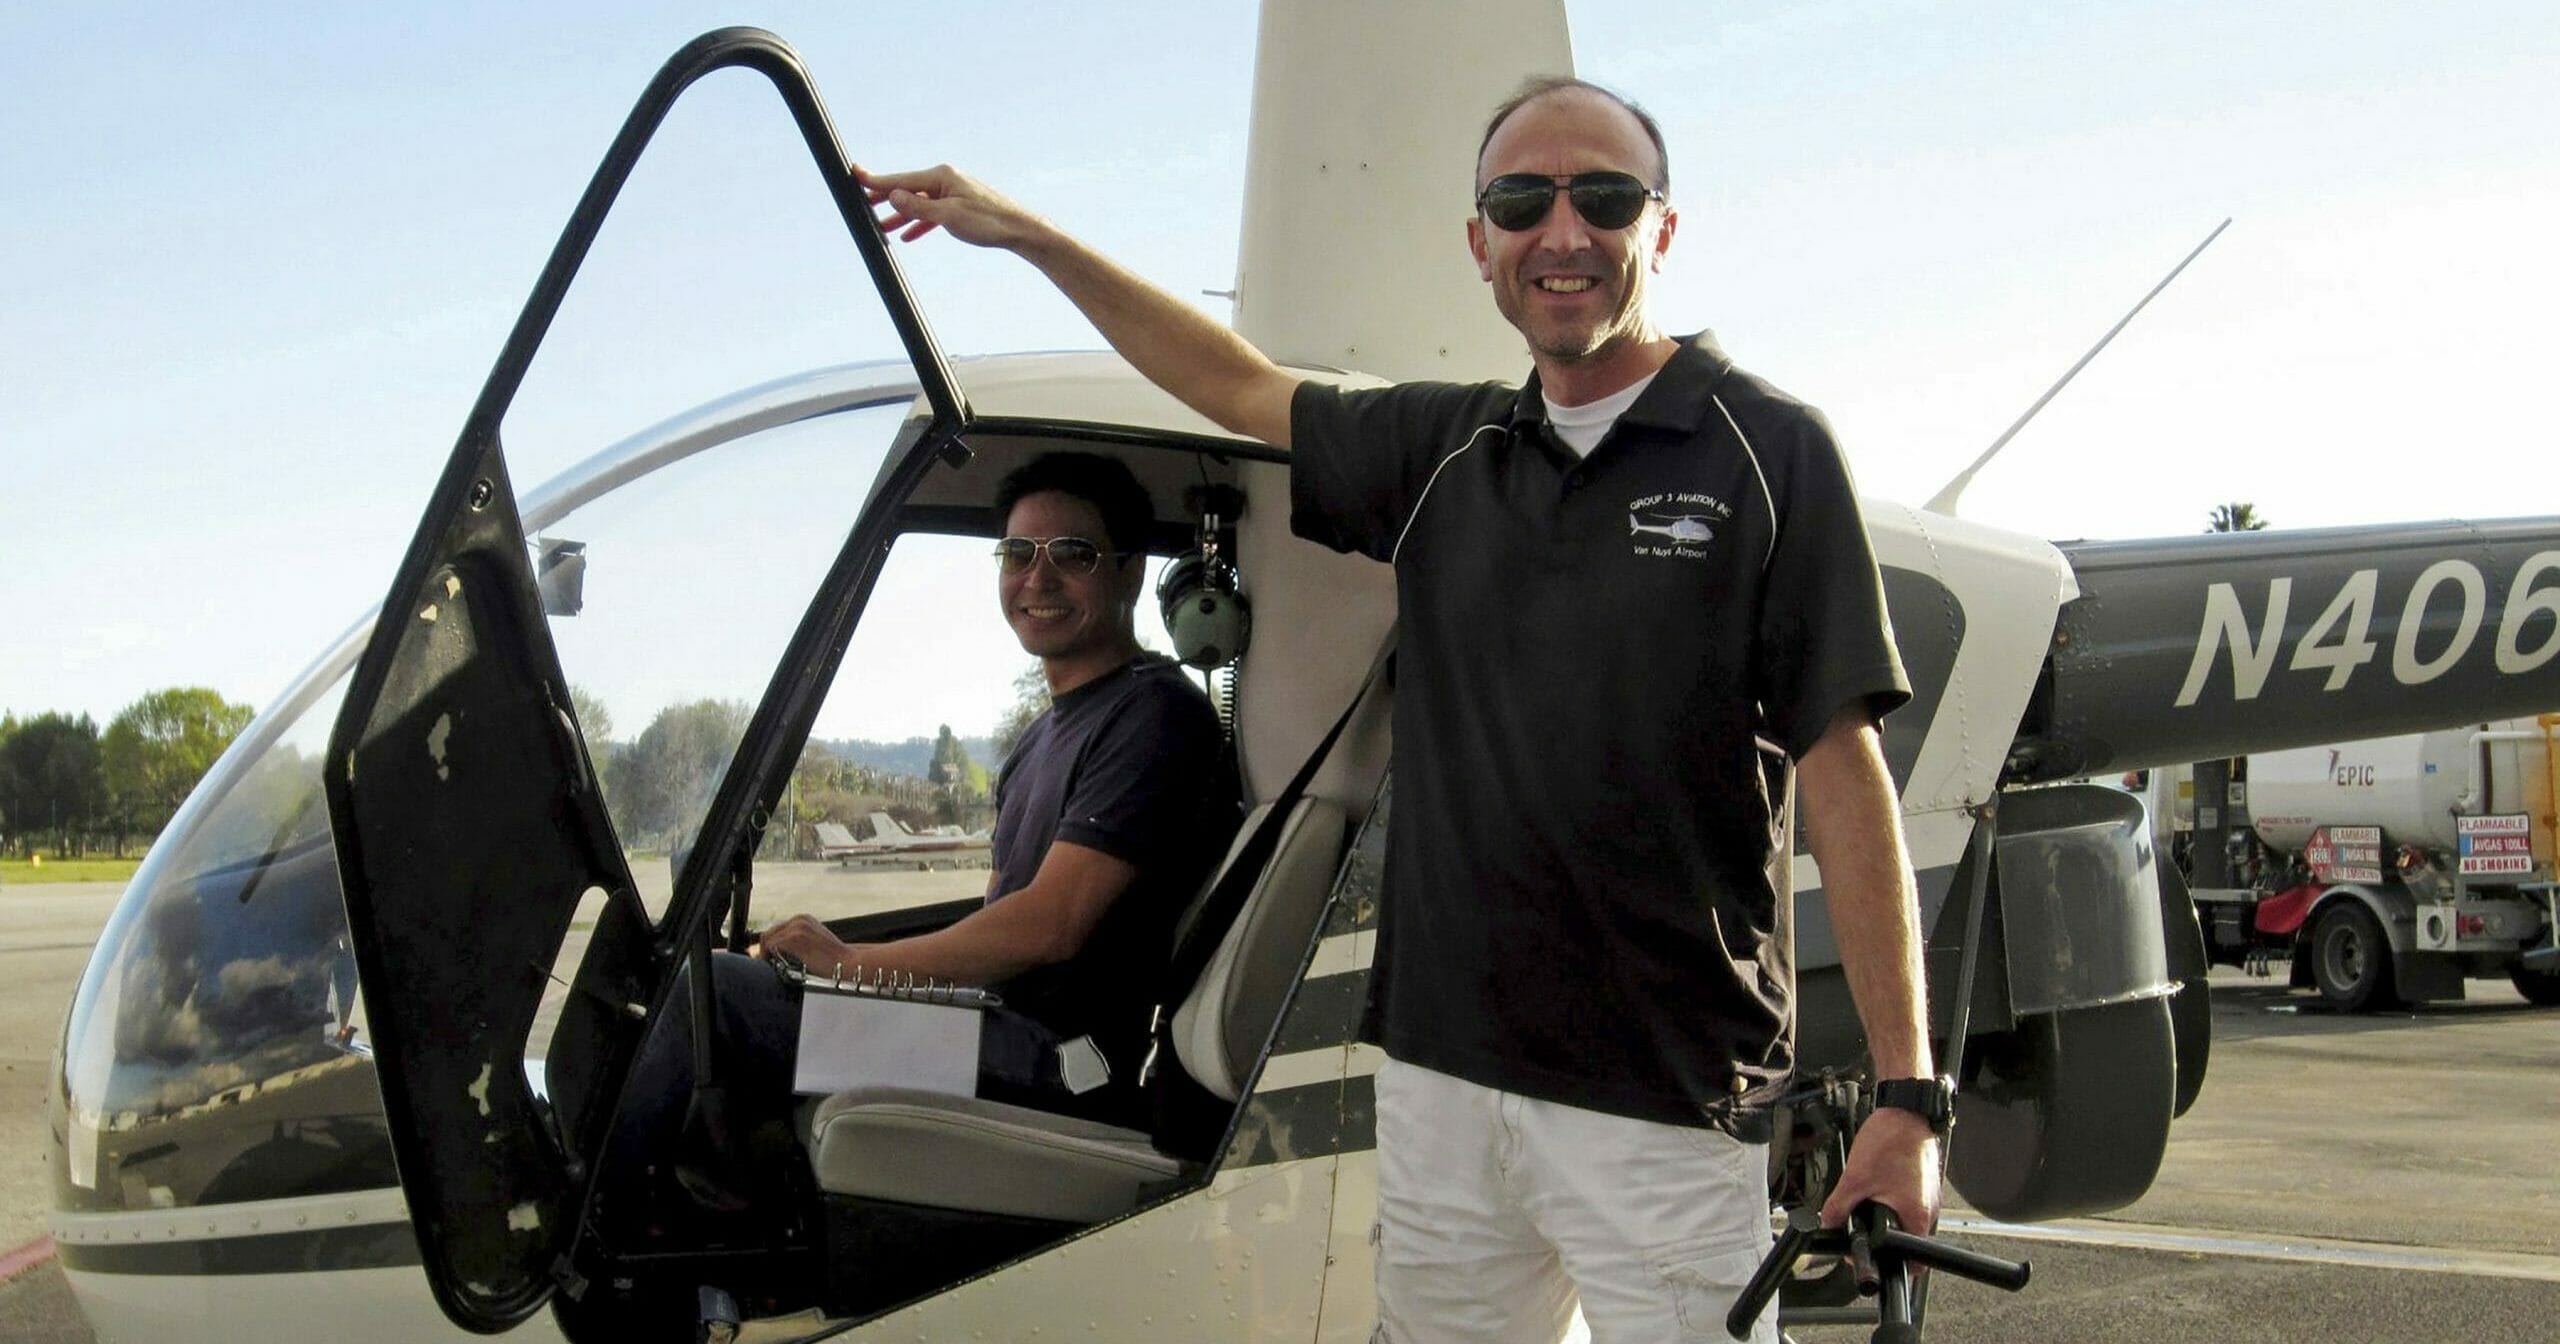 This undated file photo provided by Group 3 Aviation shows helicopter pilot Ara Zobayan standing outside a helicopter, at a location not provided.